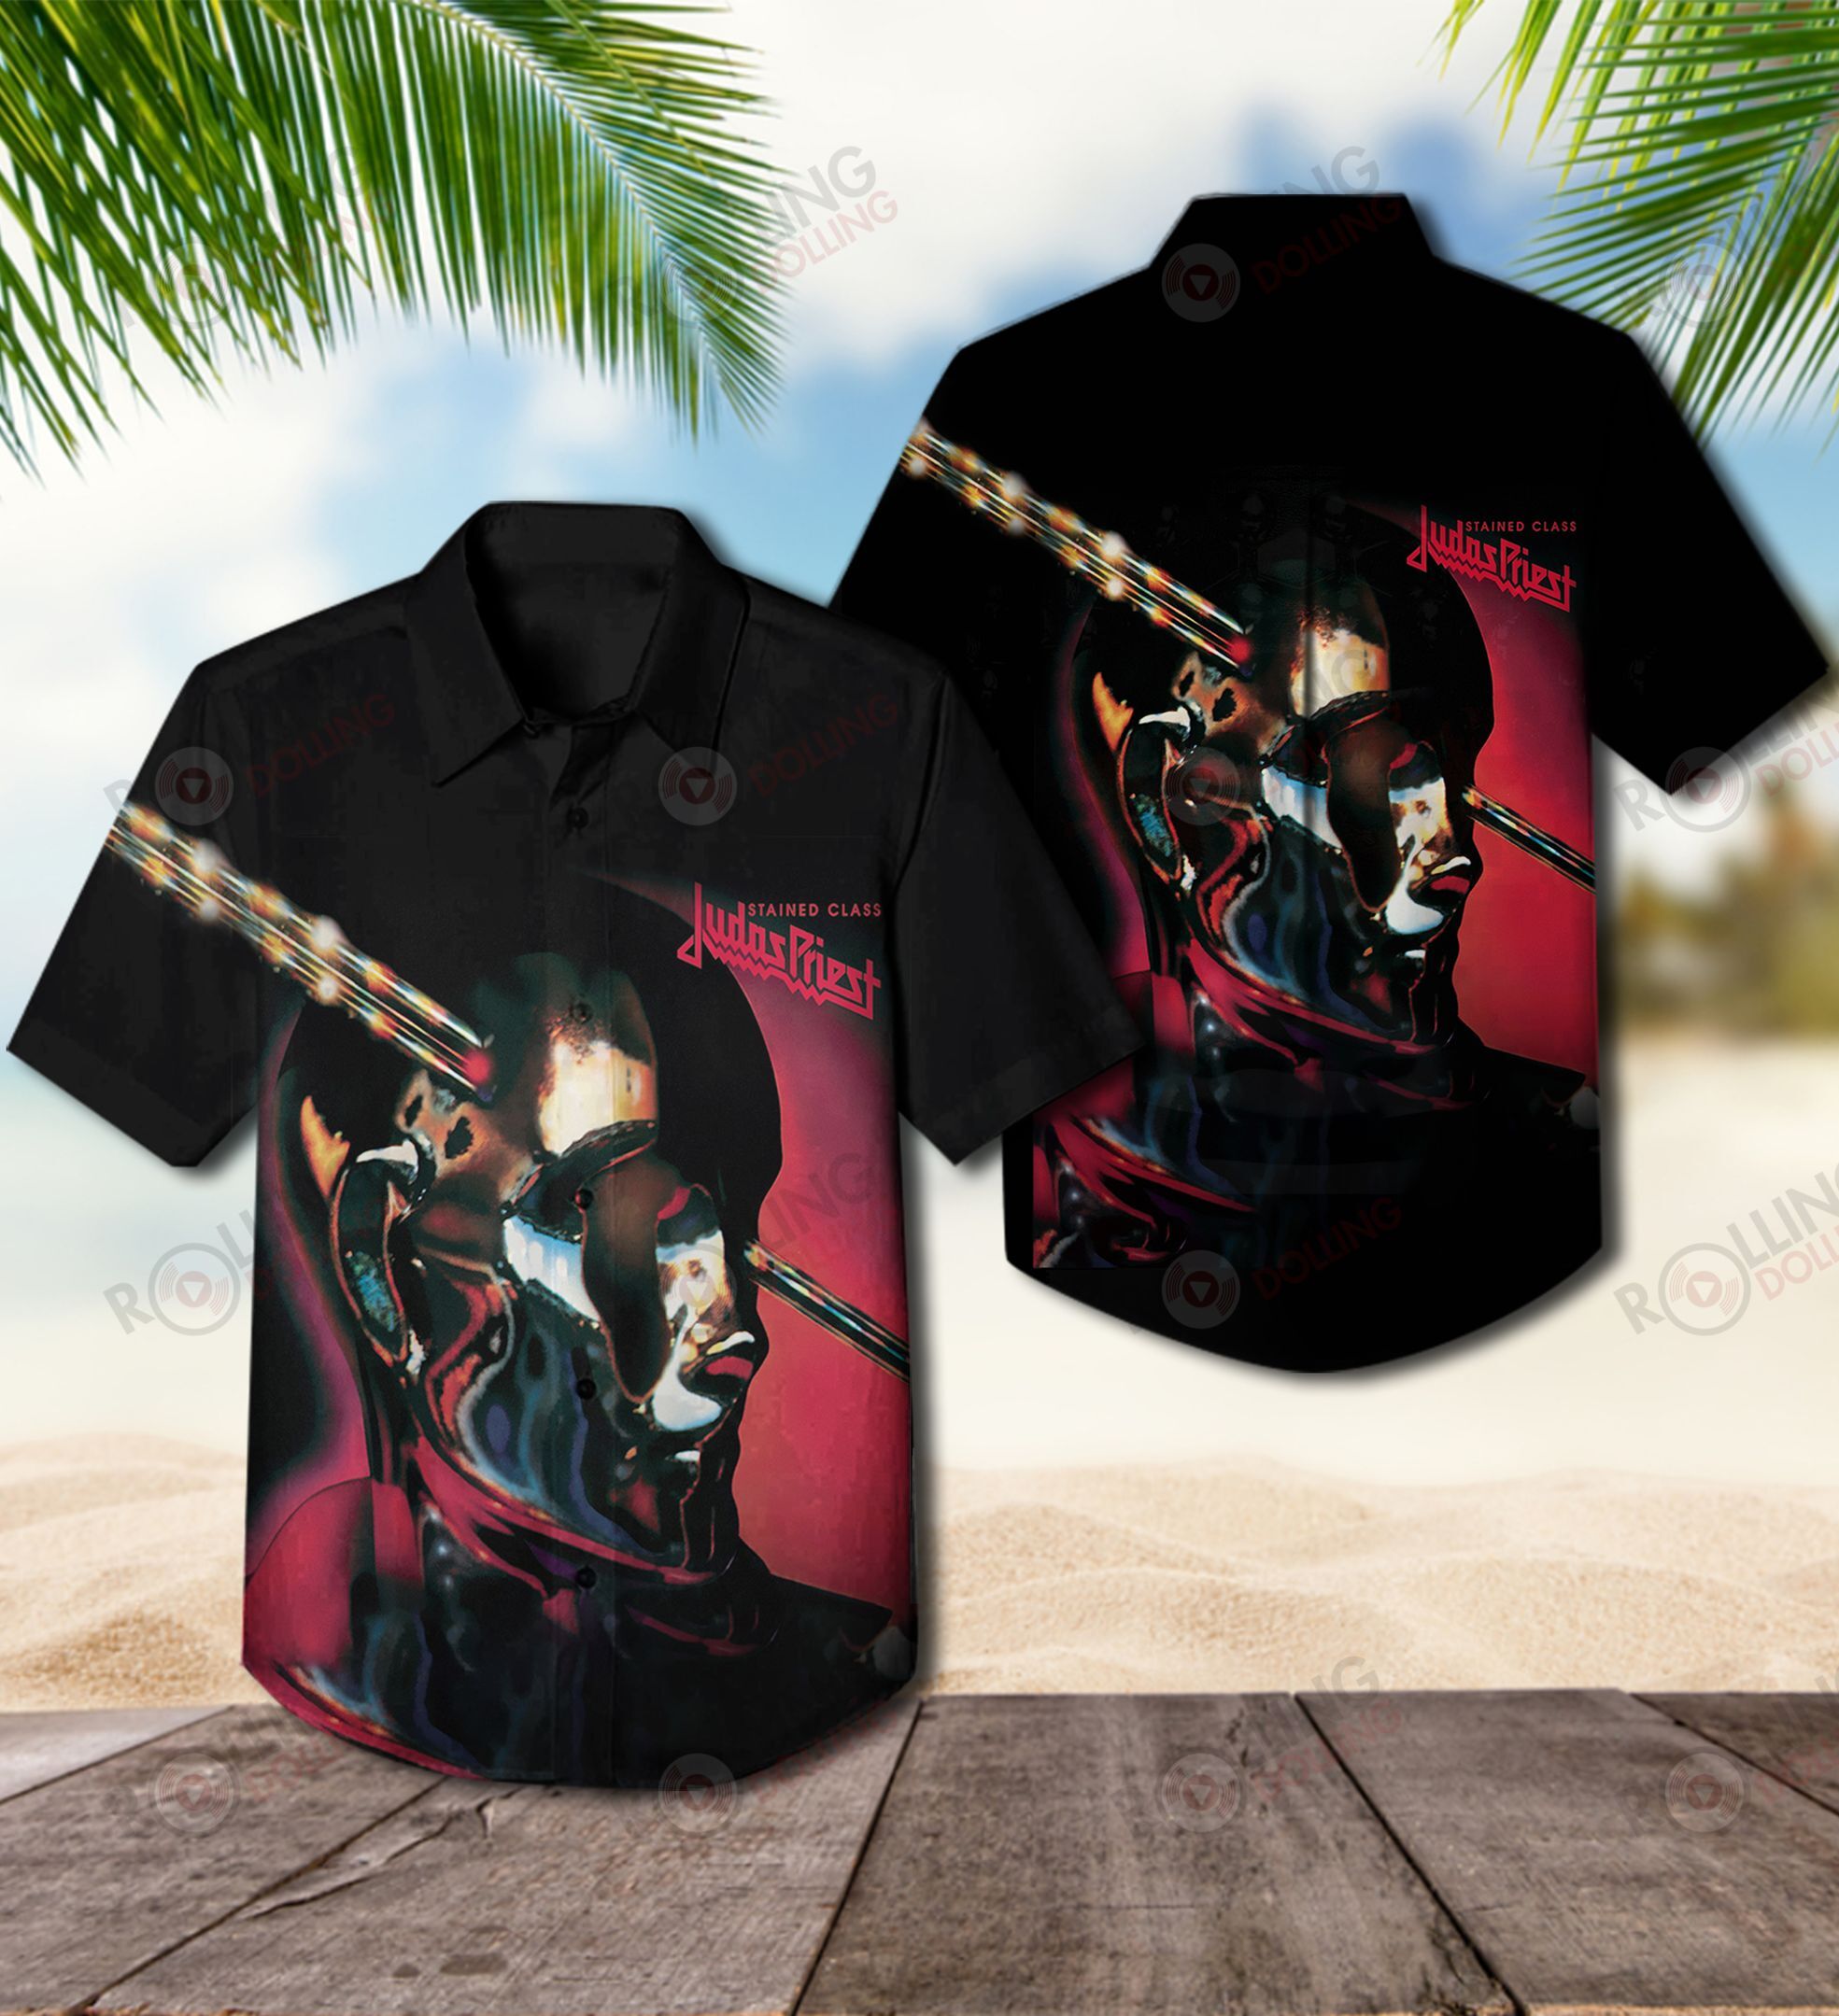 This would make a great gift for any fan who loves Hawaiian Shirt as well as Rock band 113